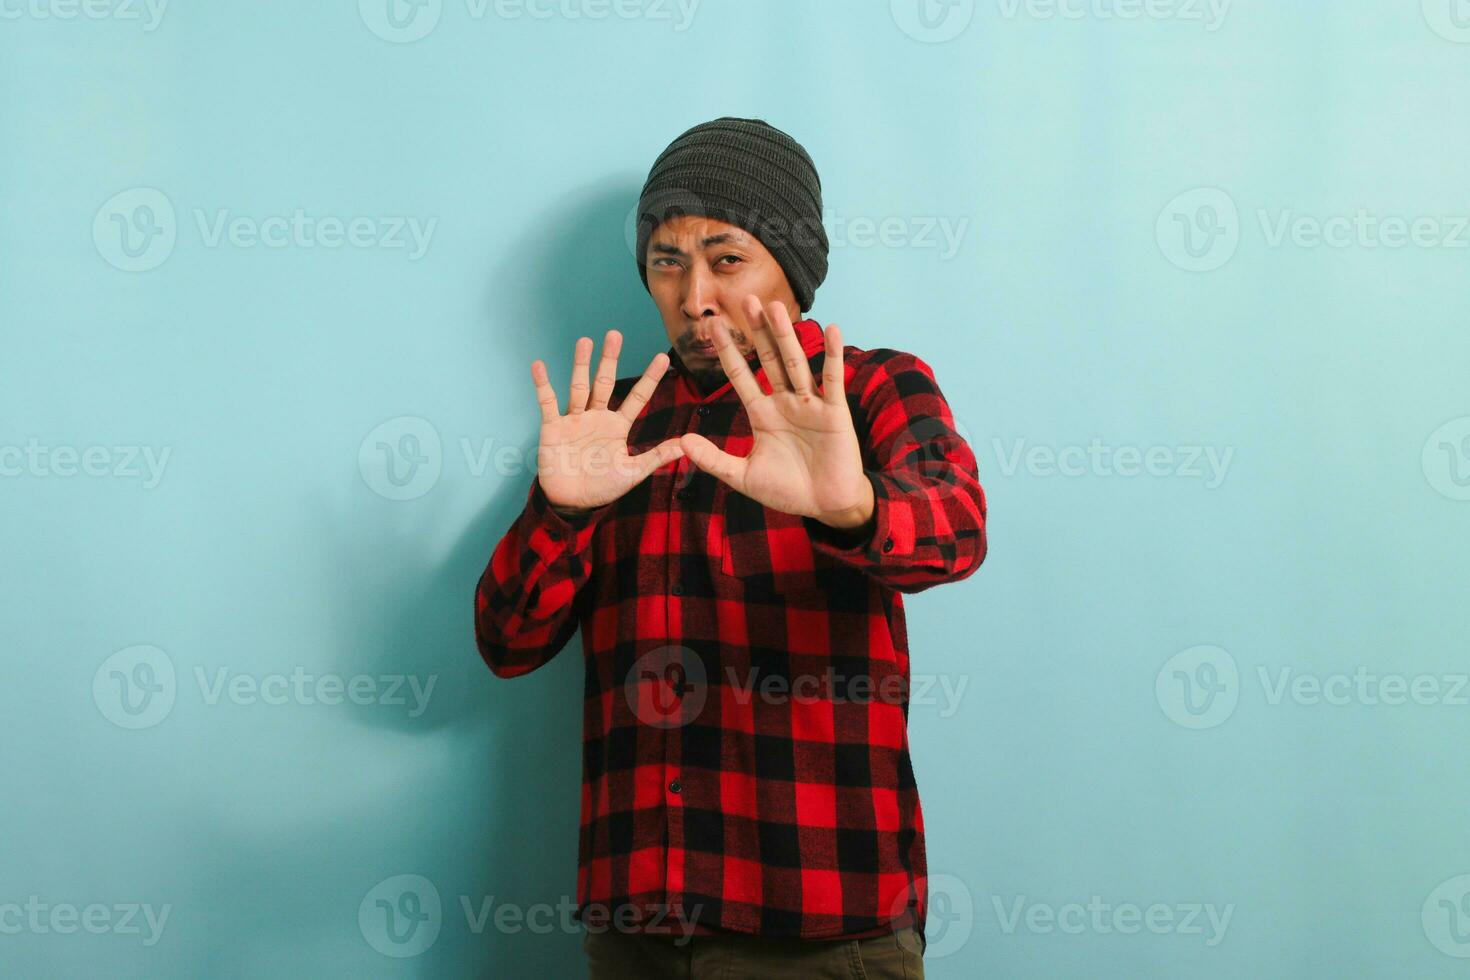 Ew, It's so gross. An annoyed young Asian man with a beanie hat and a red plaid flannel shirt is repulsed by something, displaying a disgusted expression while standing against a blue background photo